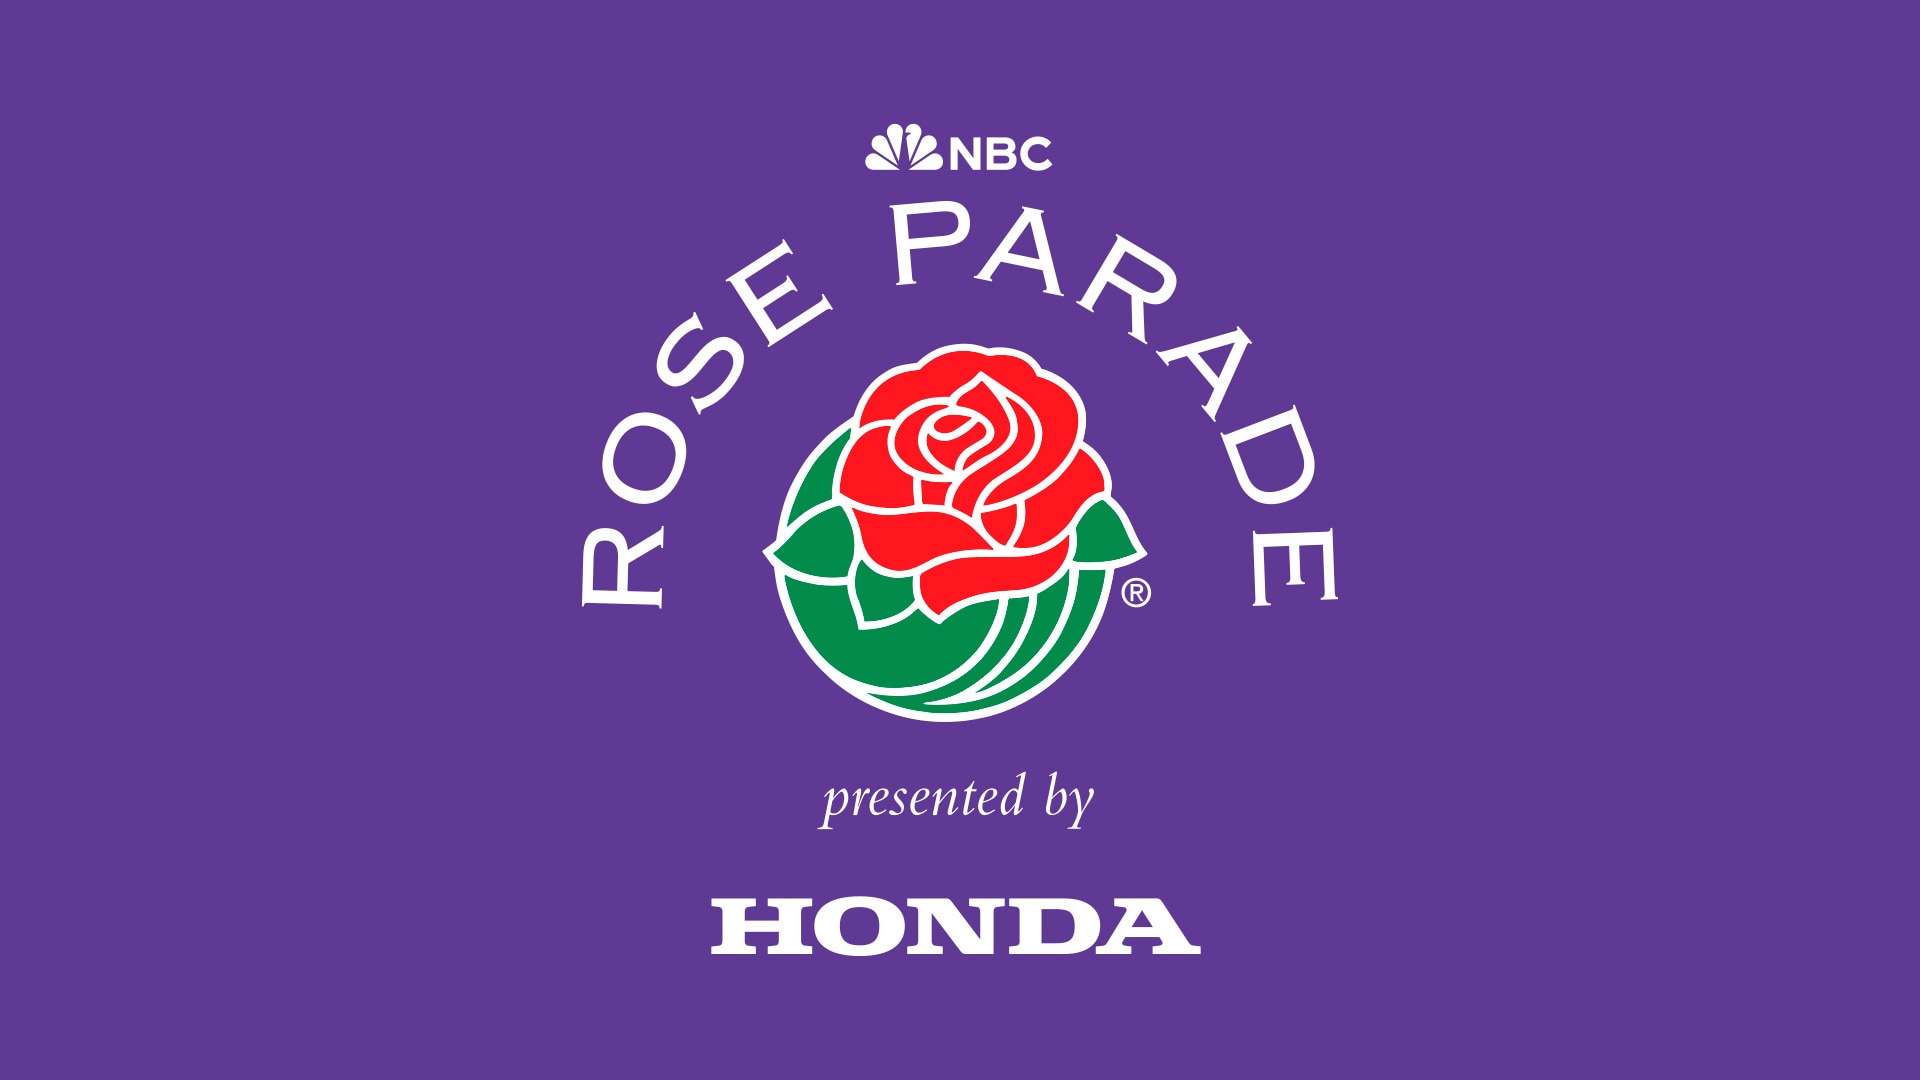 The Tournament of Roses Parade